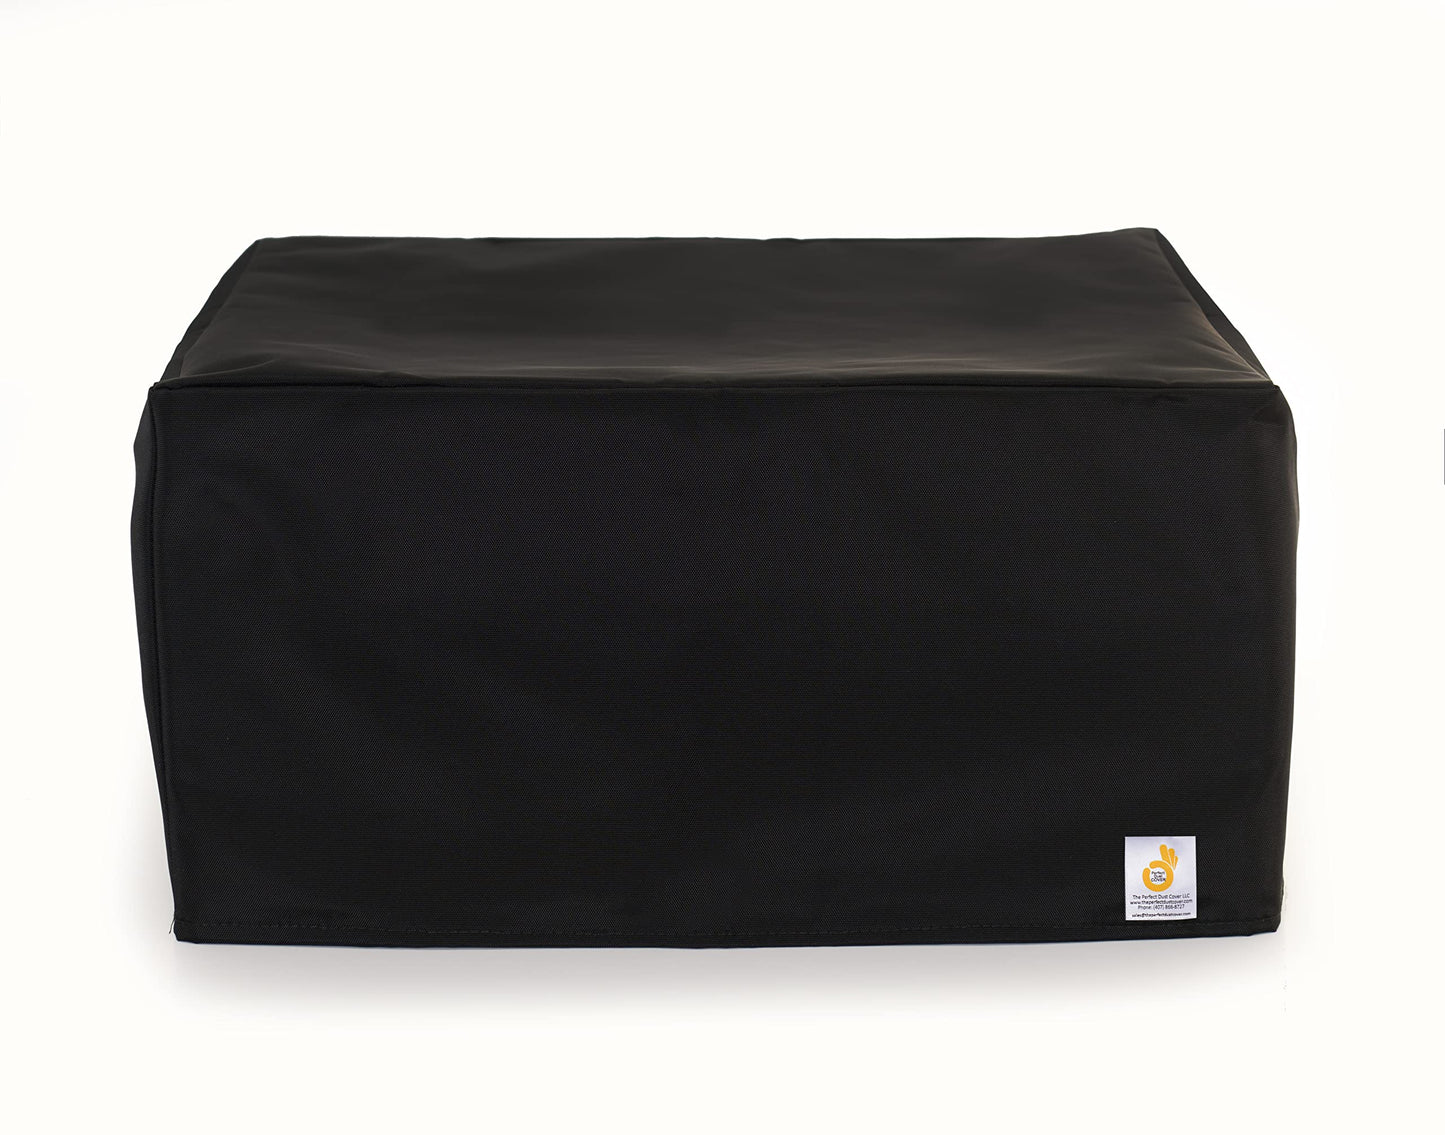 The Perfect Dust Cover, Black Nylon Cover Compatible with Epson Workforce Pro WF-3732 All-in-One Printer, Anti Static and Double Stitched Dust Cover by The Perfect Dust Cover LLC